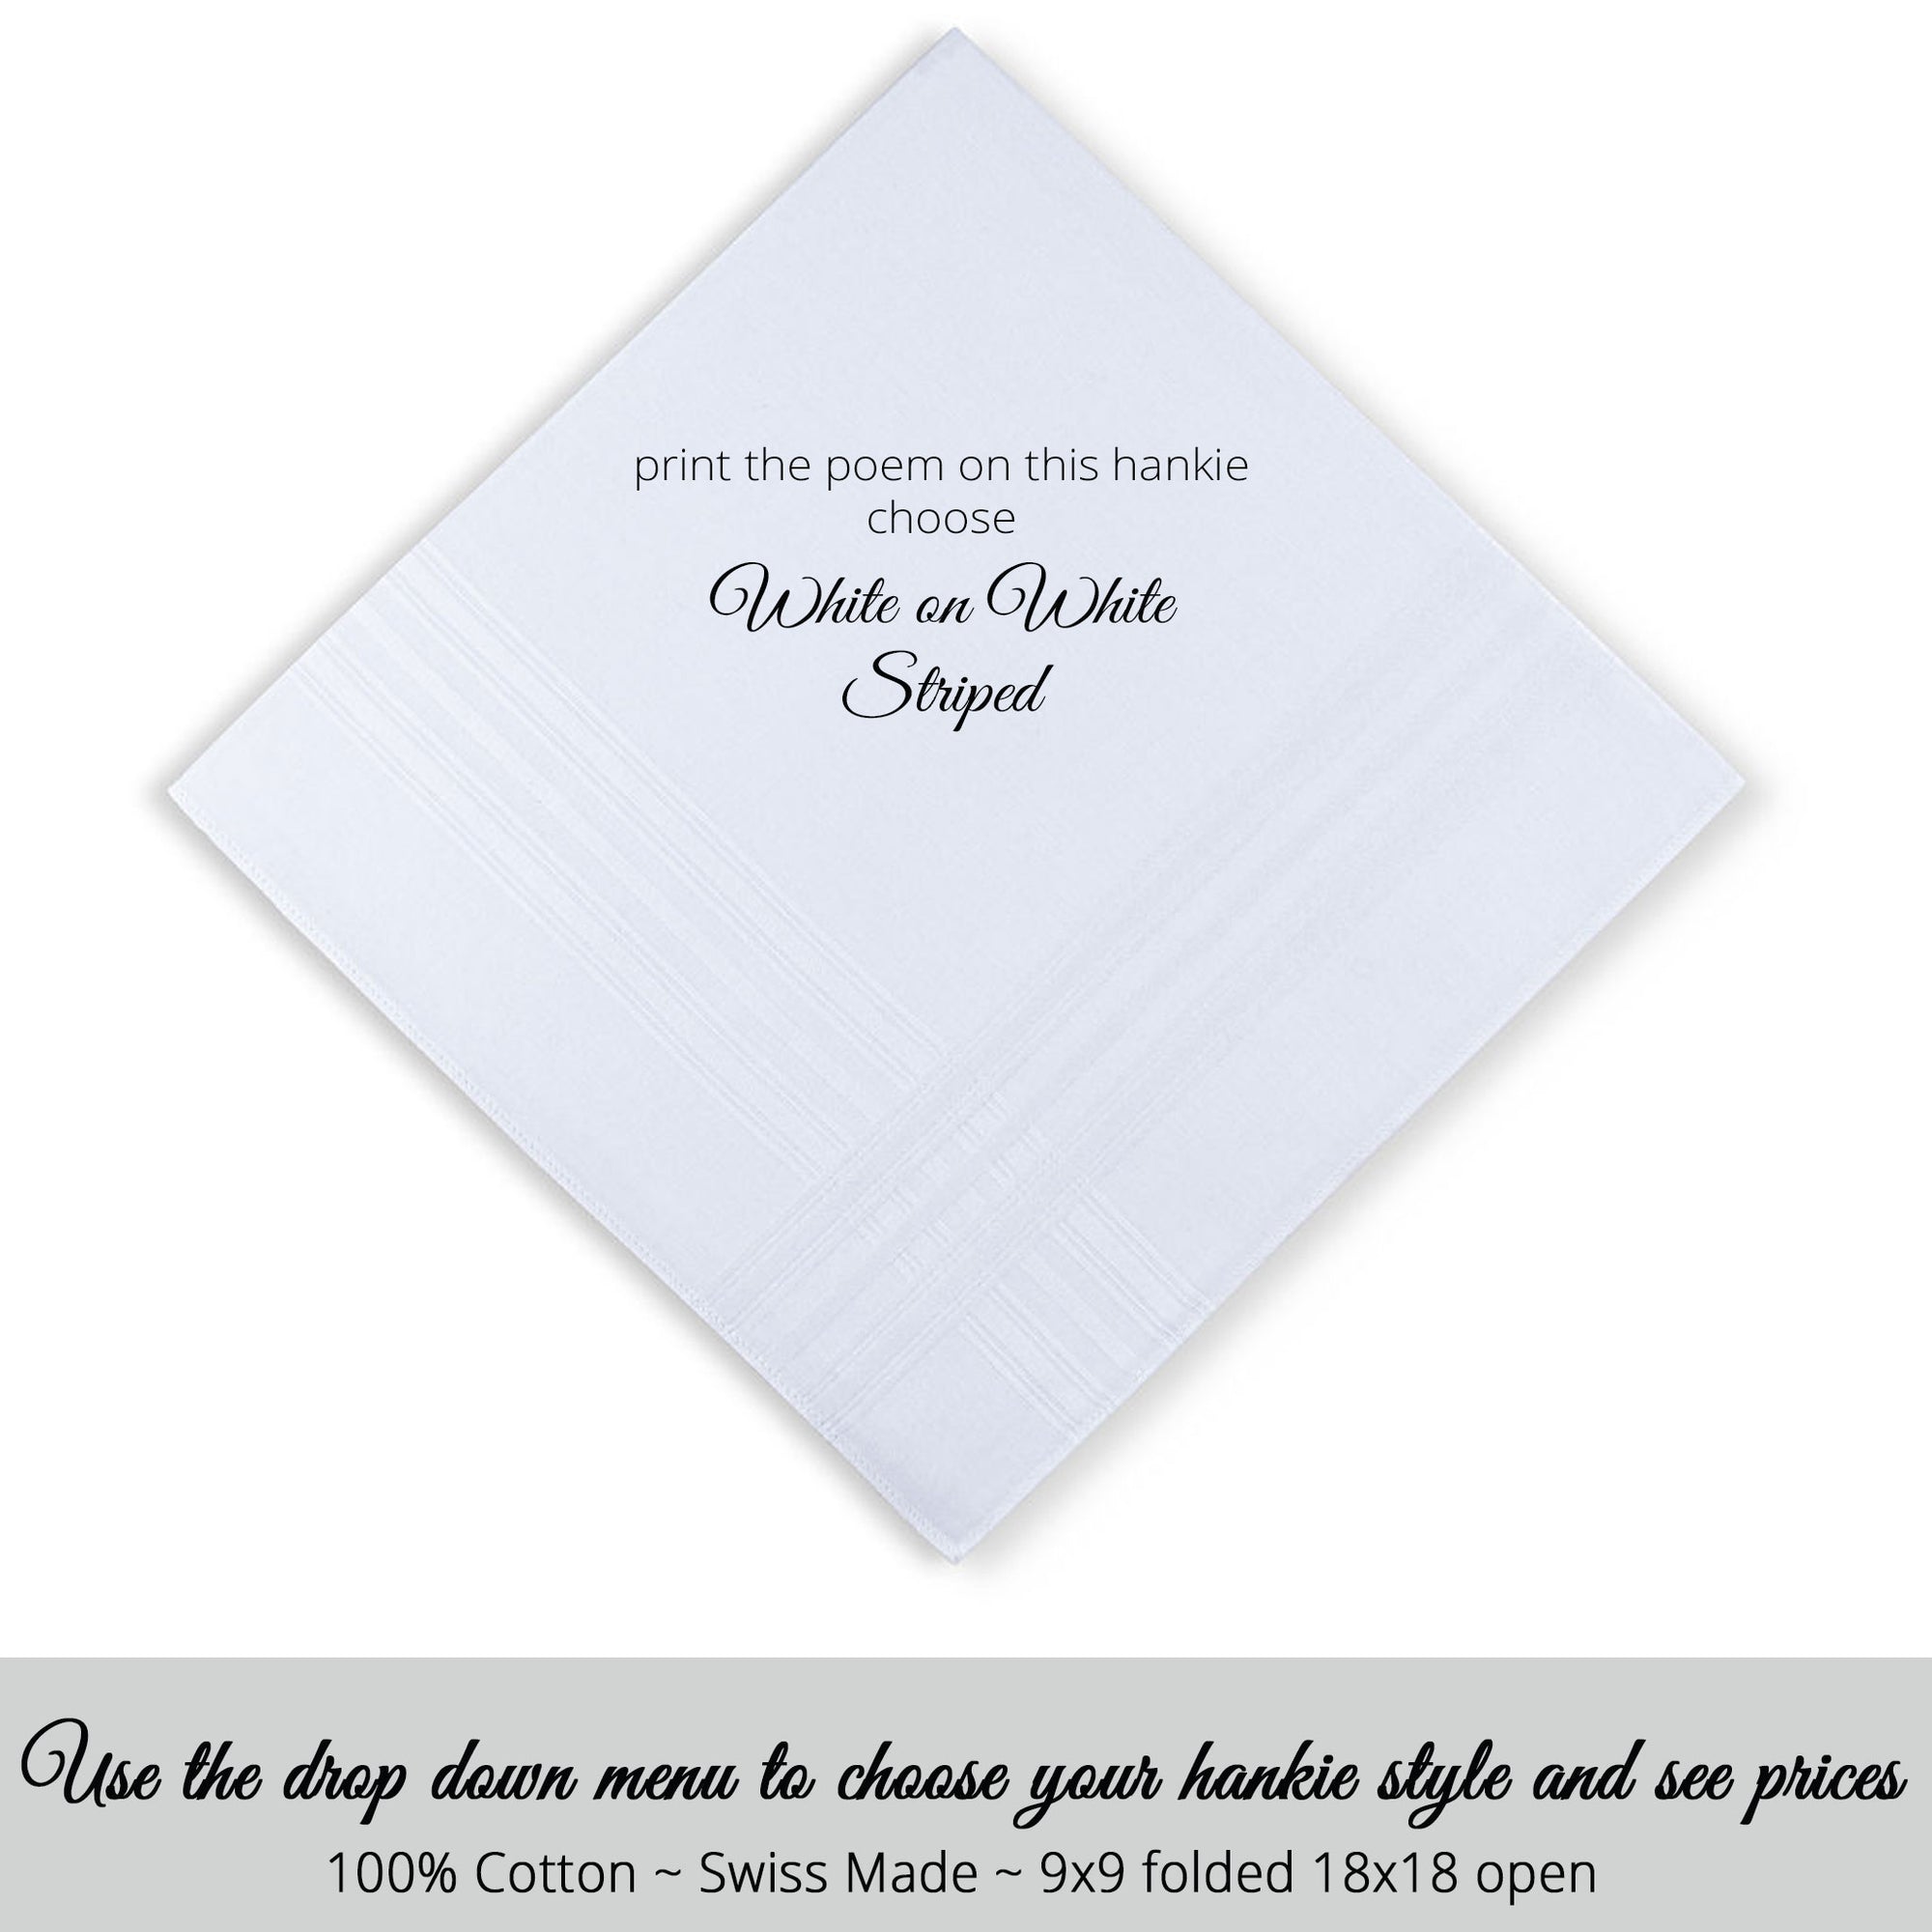 Poem Printed Wedding Hankie from Bride to Her Brother "You Have Always Been There"